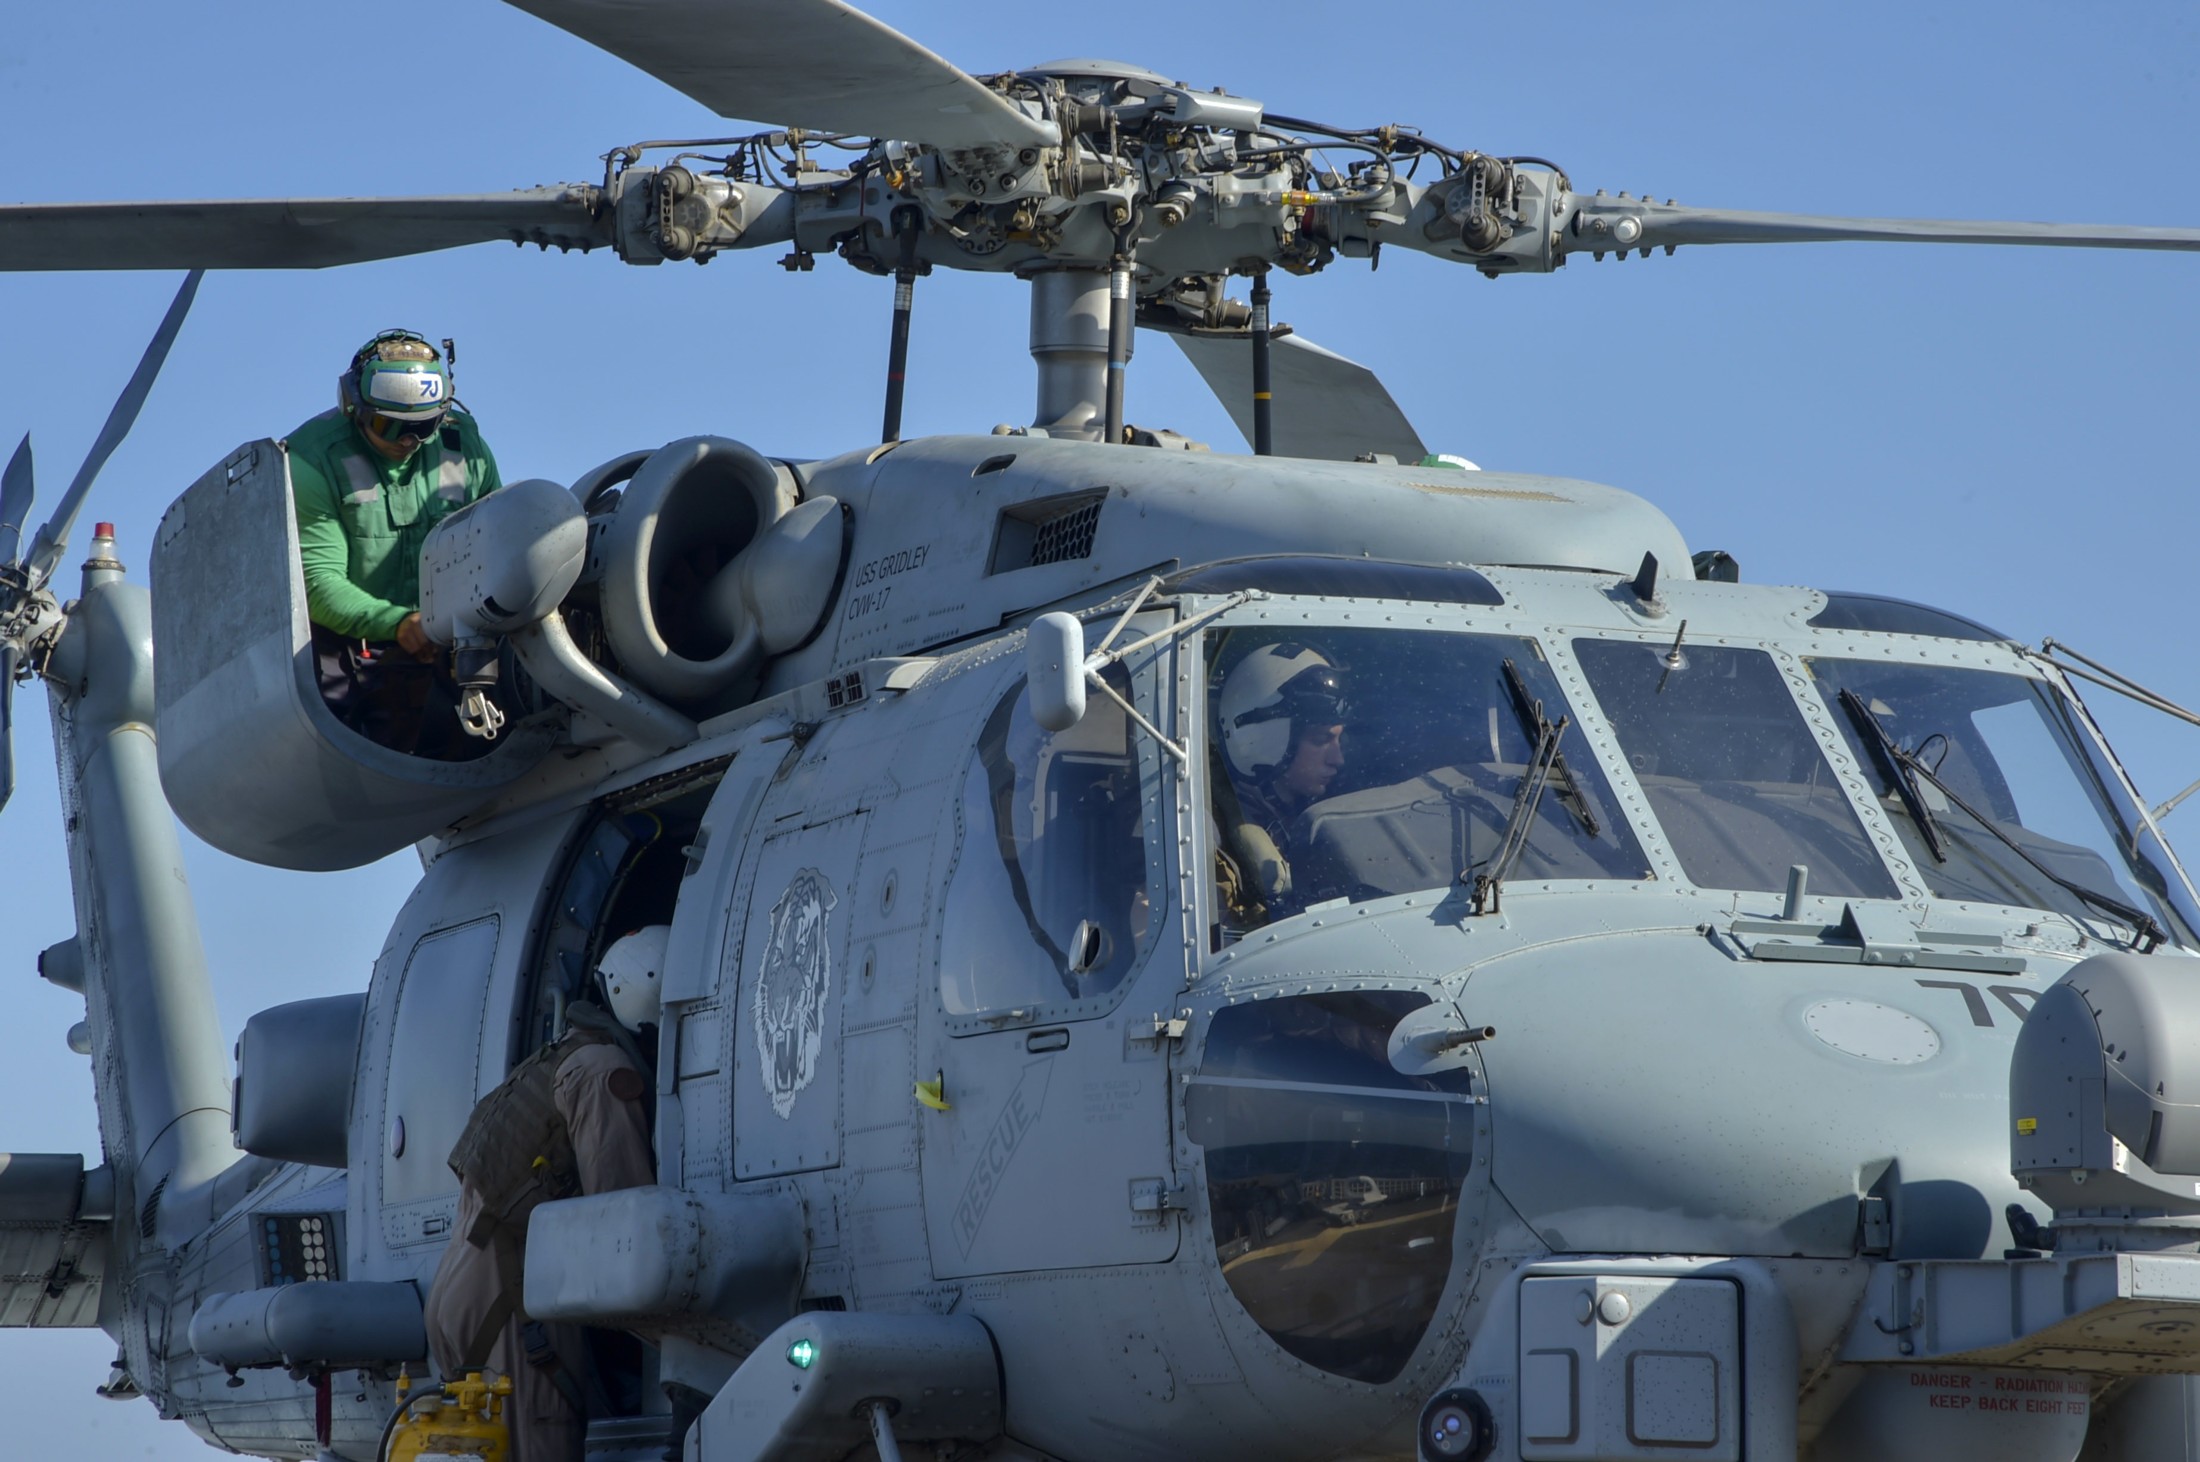 hsm-73 battlecats helicopter maritime strike squadron us navy mh-60r seahawk 2015 58 uss gridley ddg-101